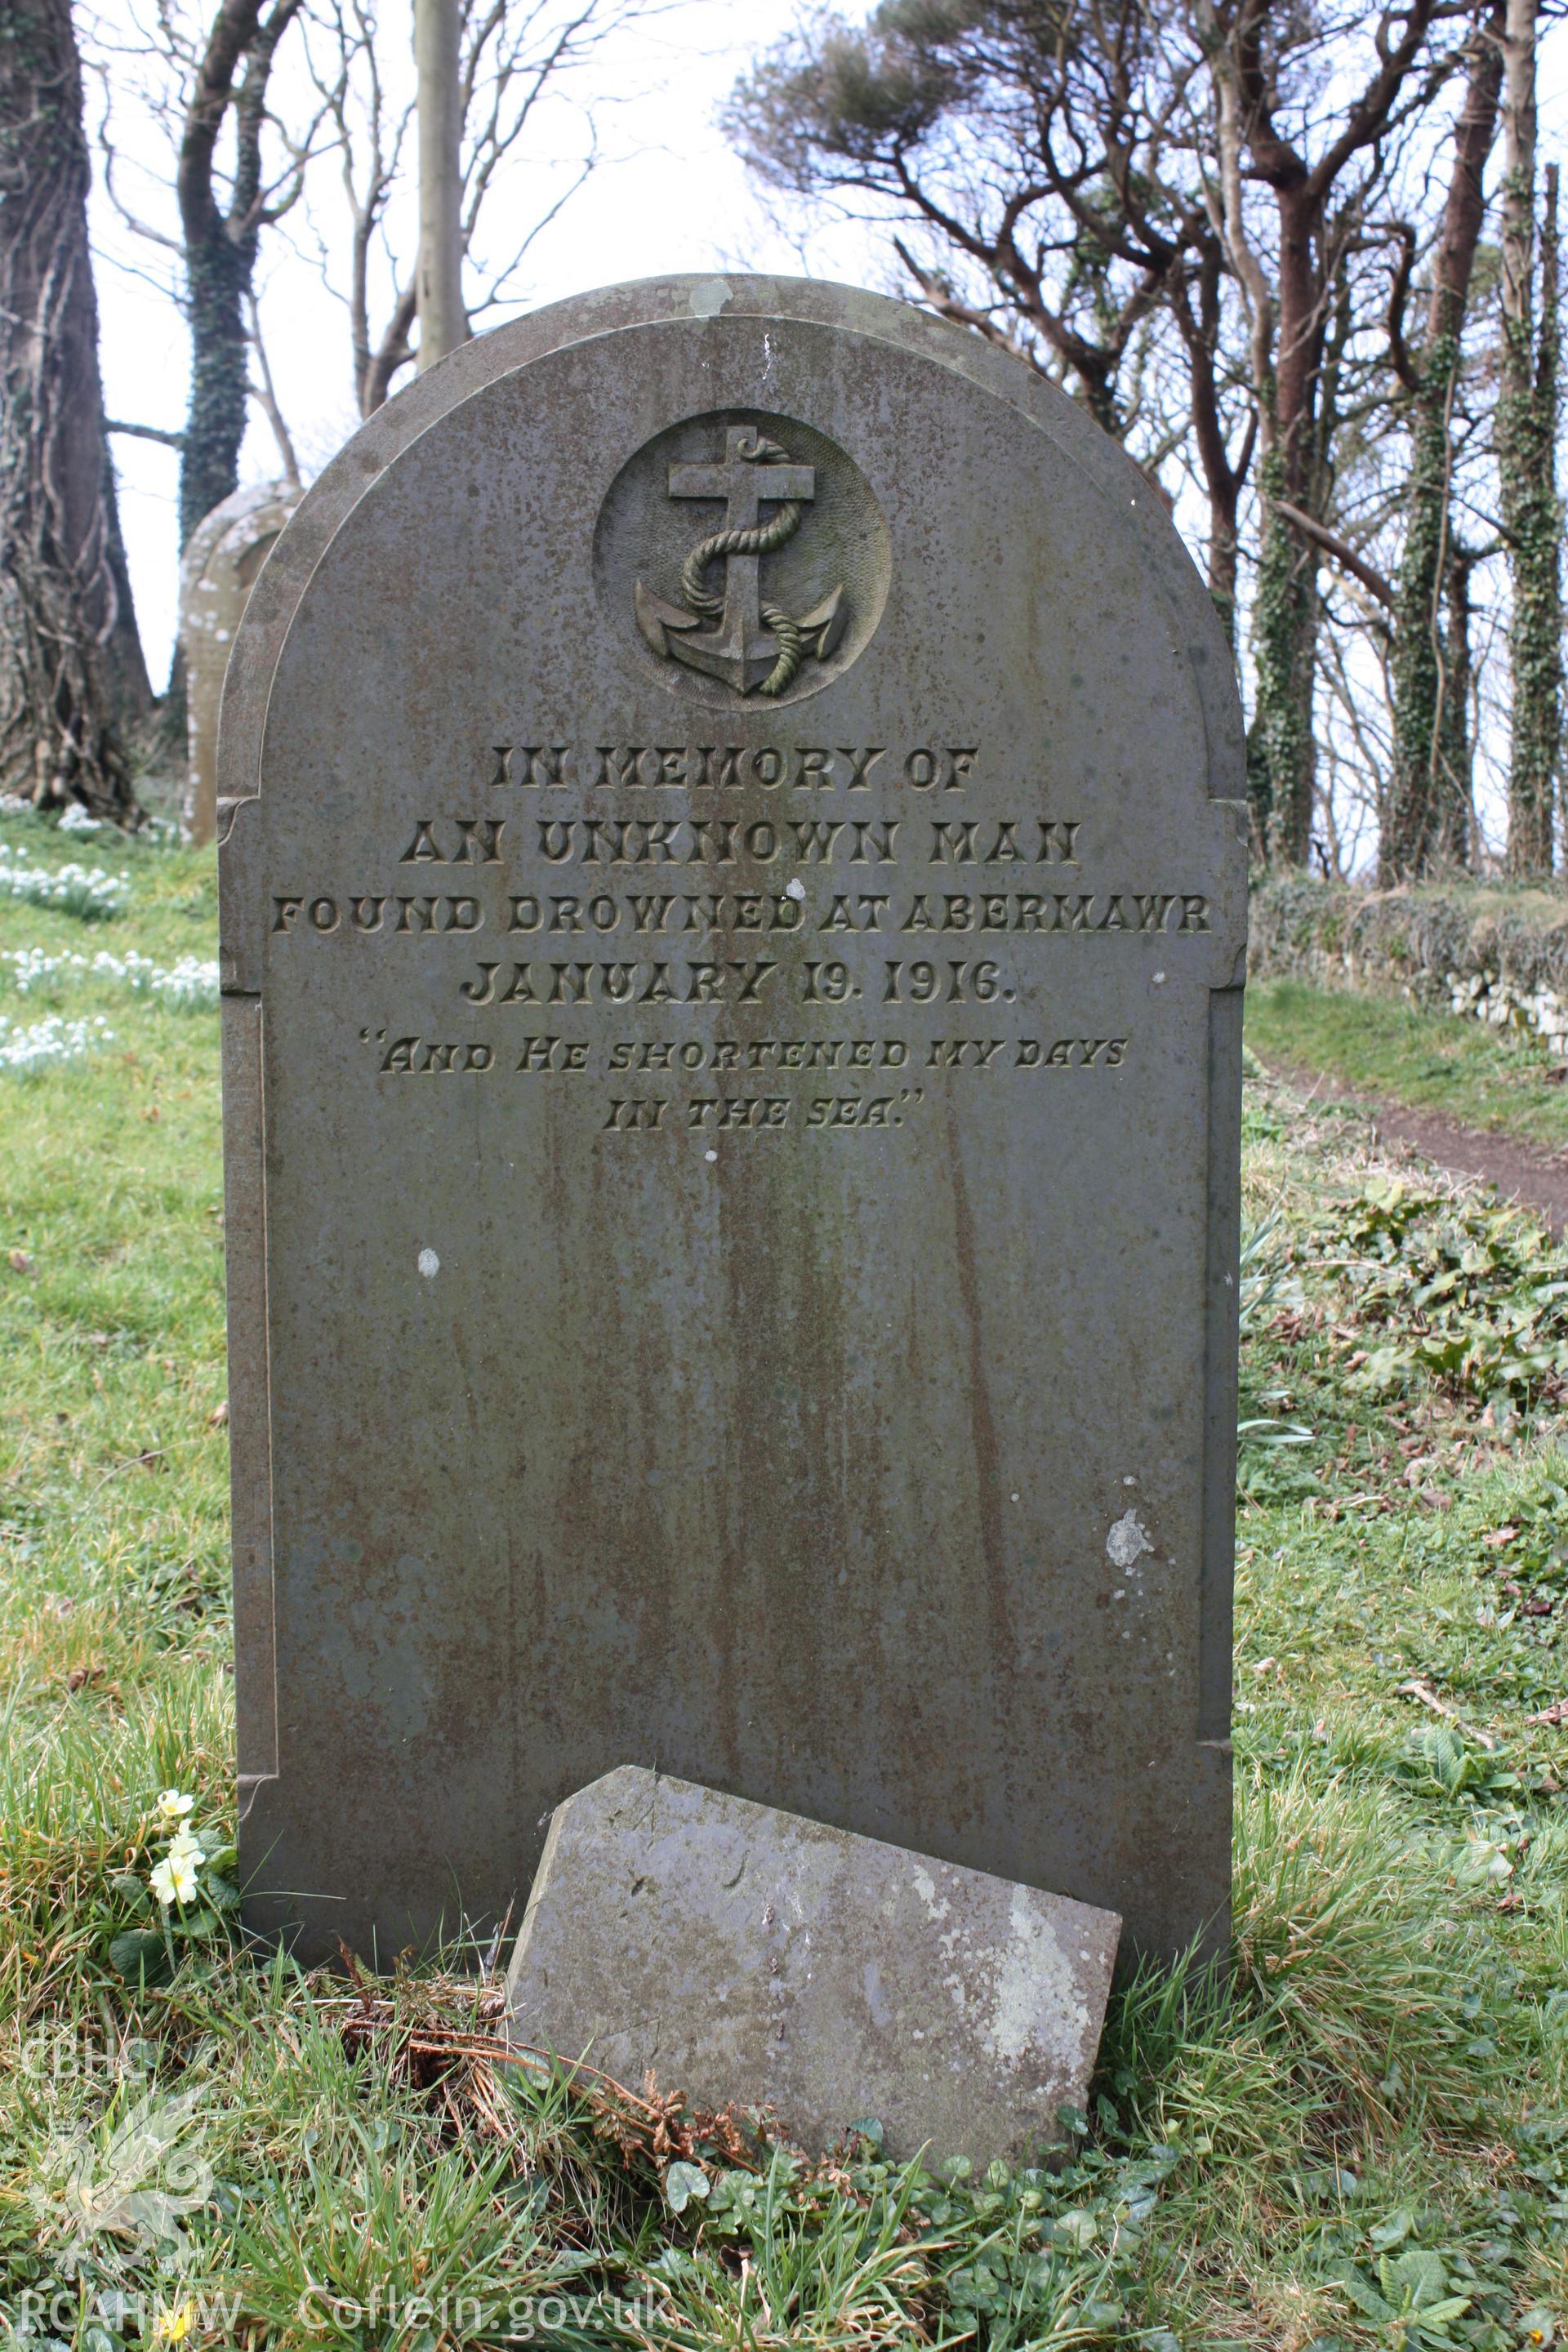 Gravestone commemorating the loss of an unknown sailor drowned during World War I